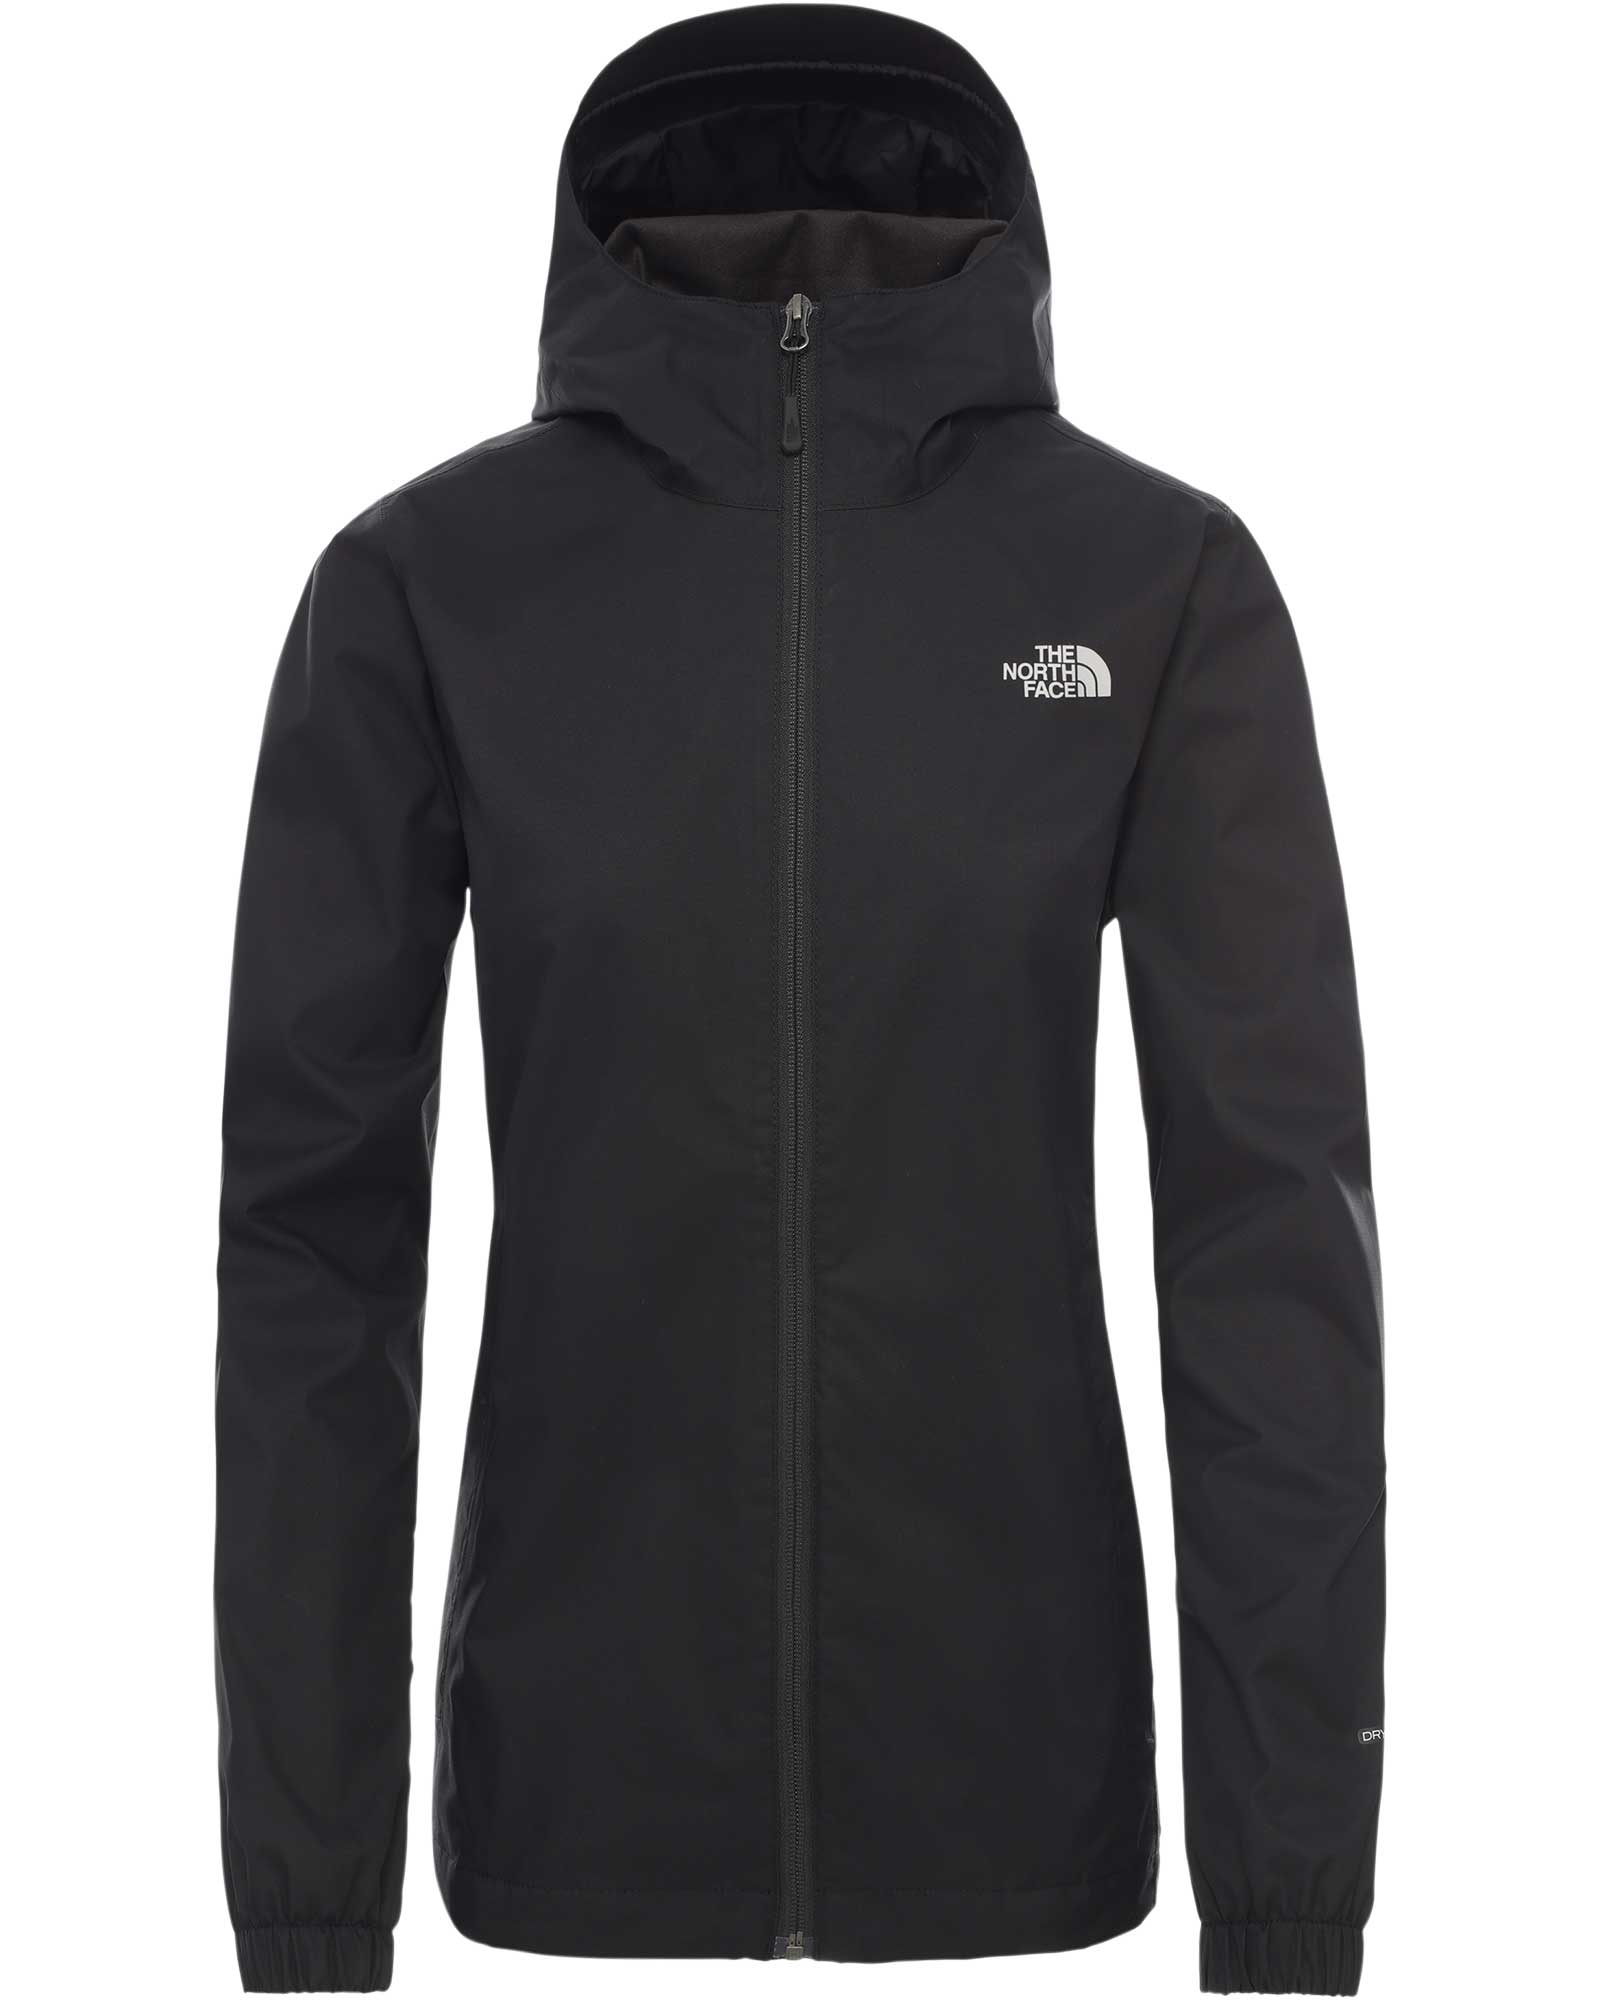 The North Face Quest DryVent Women’s Jacket - TNF Black-Foil Grey XS